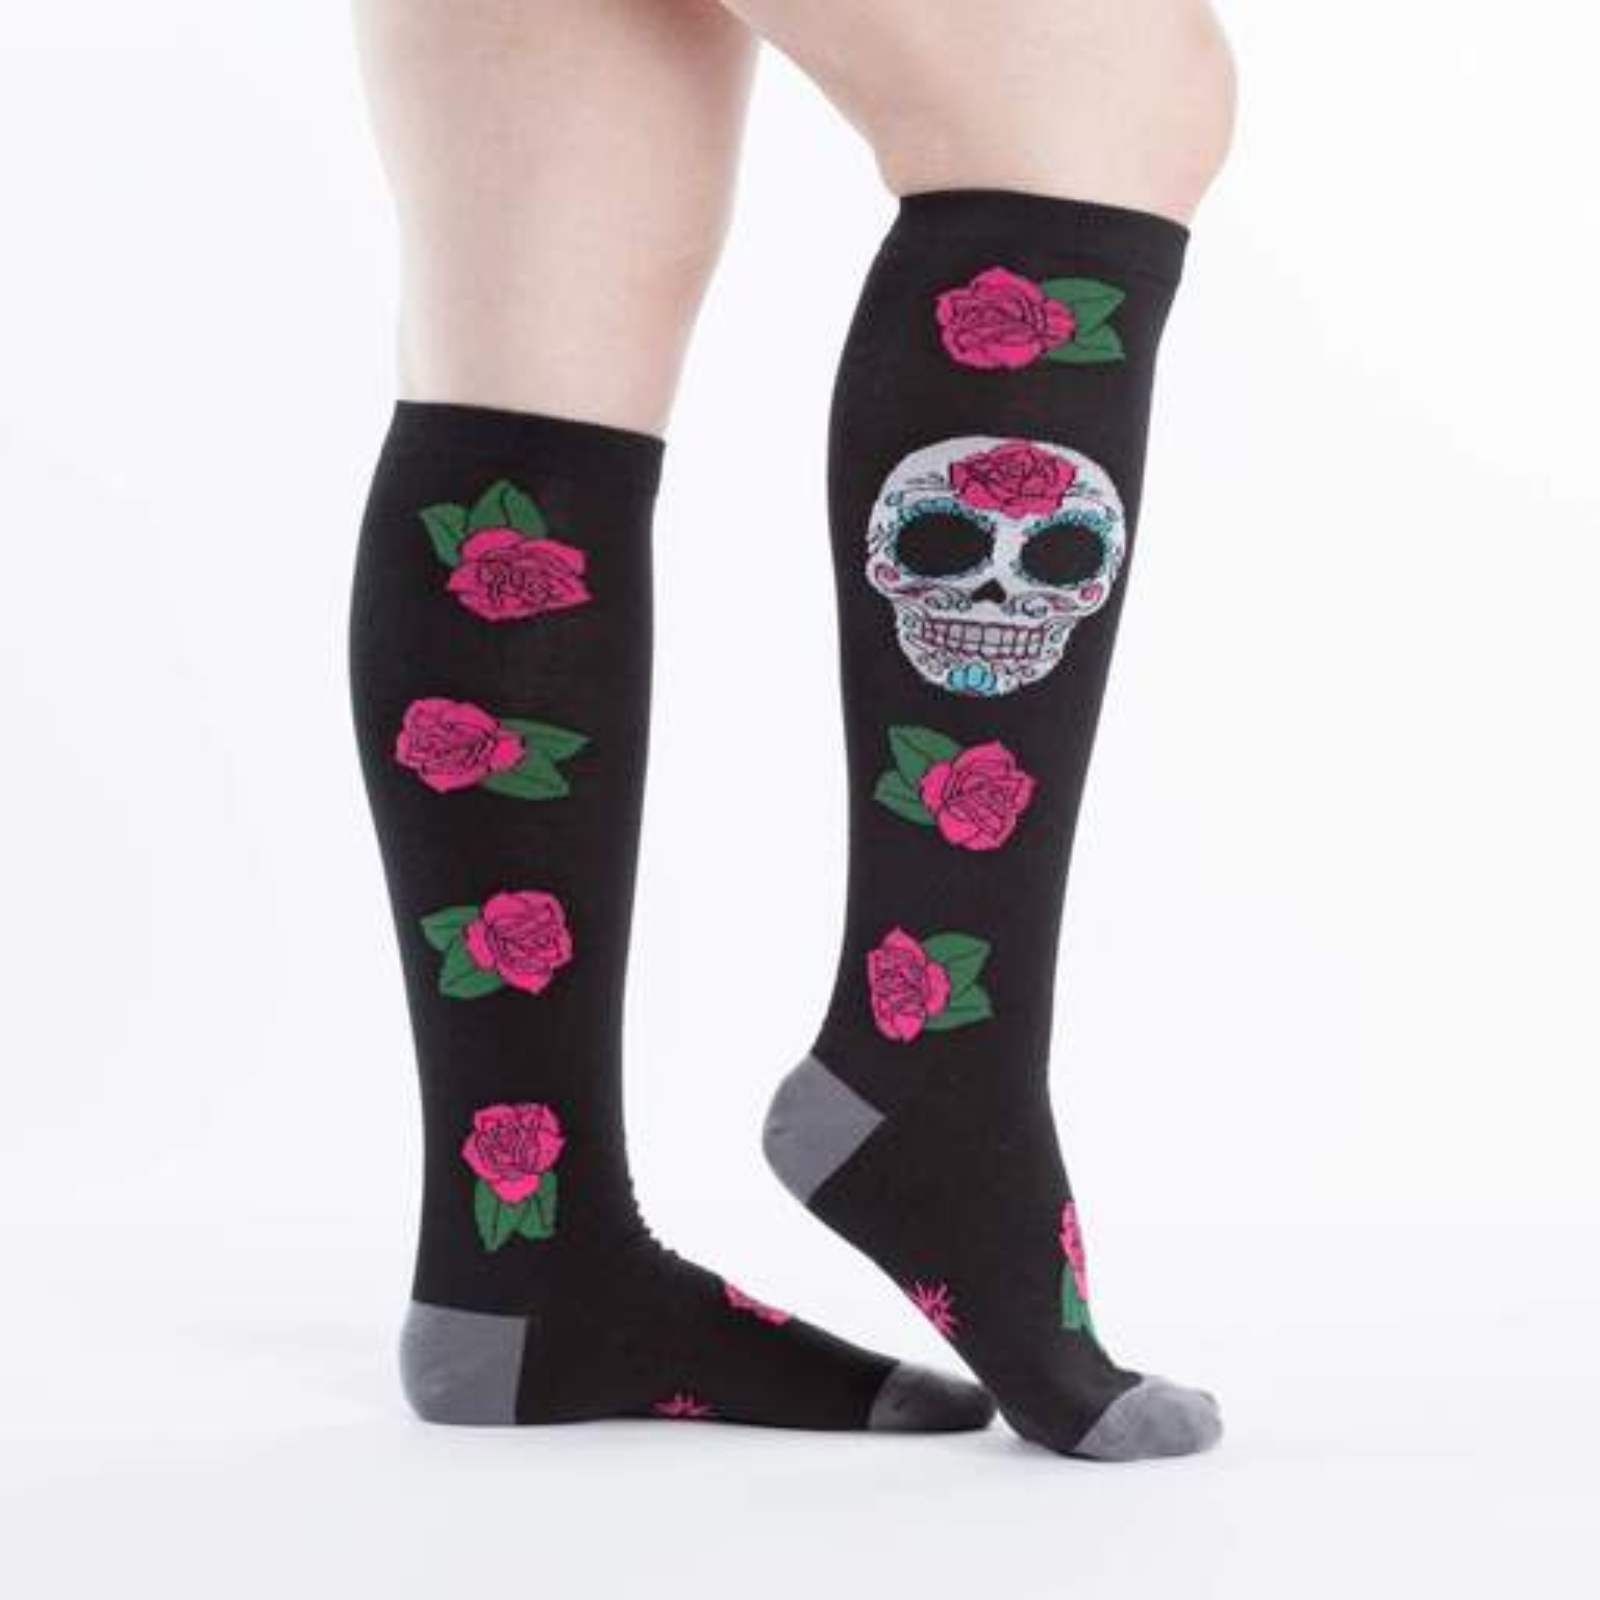 Sock It To Me Sugar Skull women's knee high sock featuring black sock with red roses all over and large Day of the Dead Sugar Skull. Socks worn by model seen from side. 